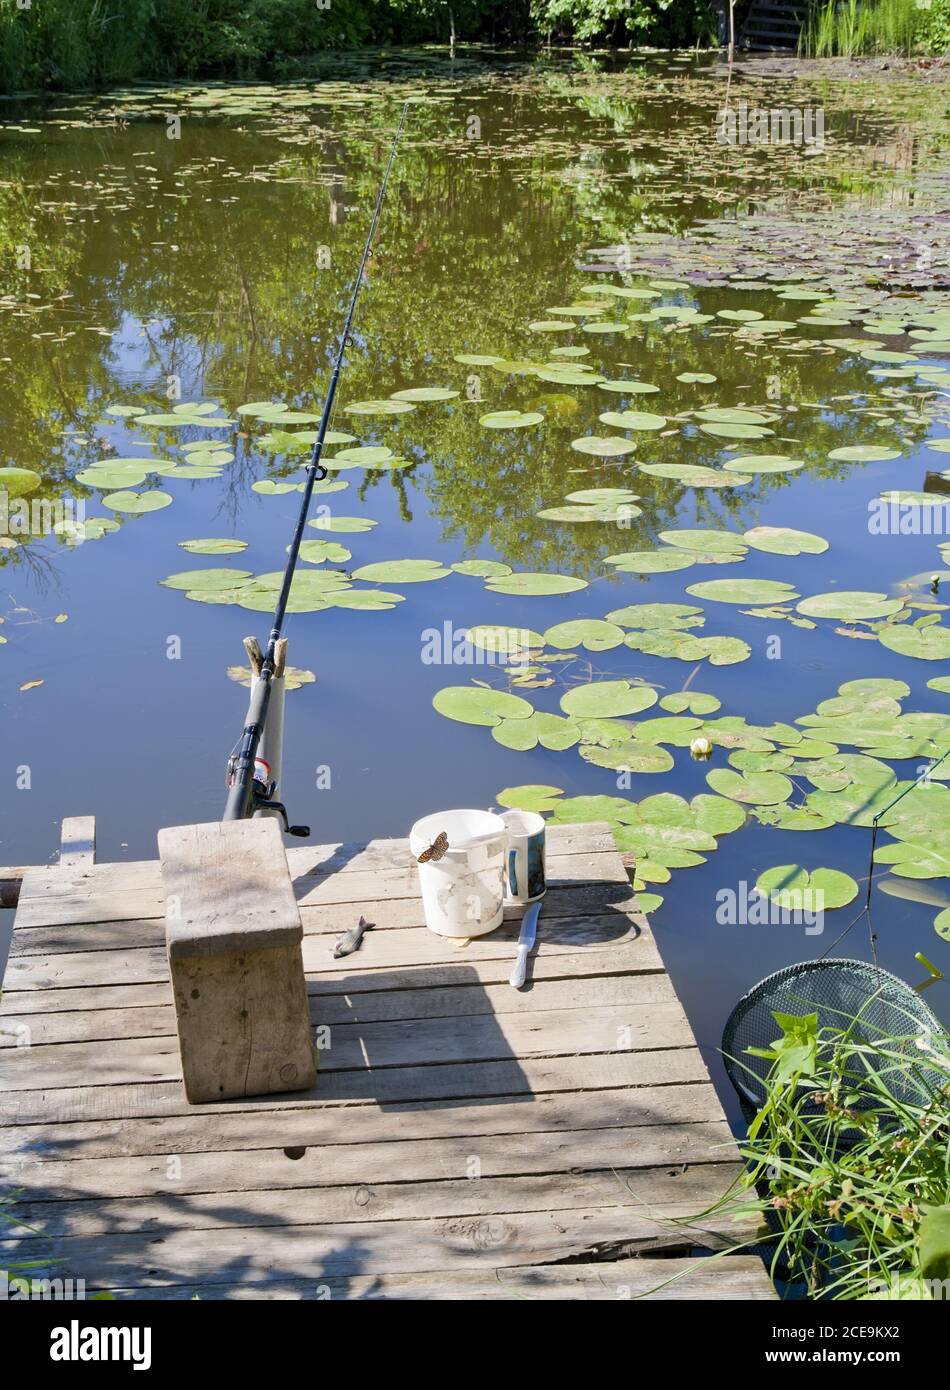 Place for fishing in a small rural pond Stock Photo